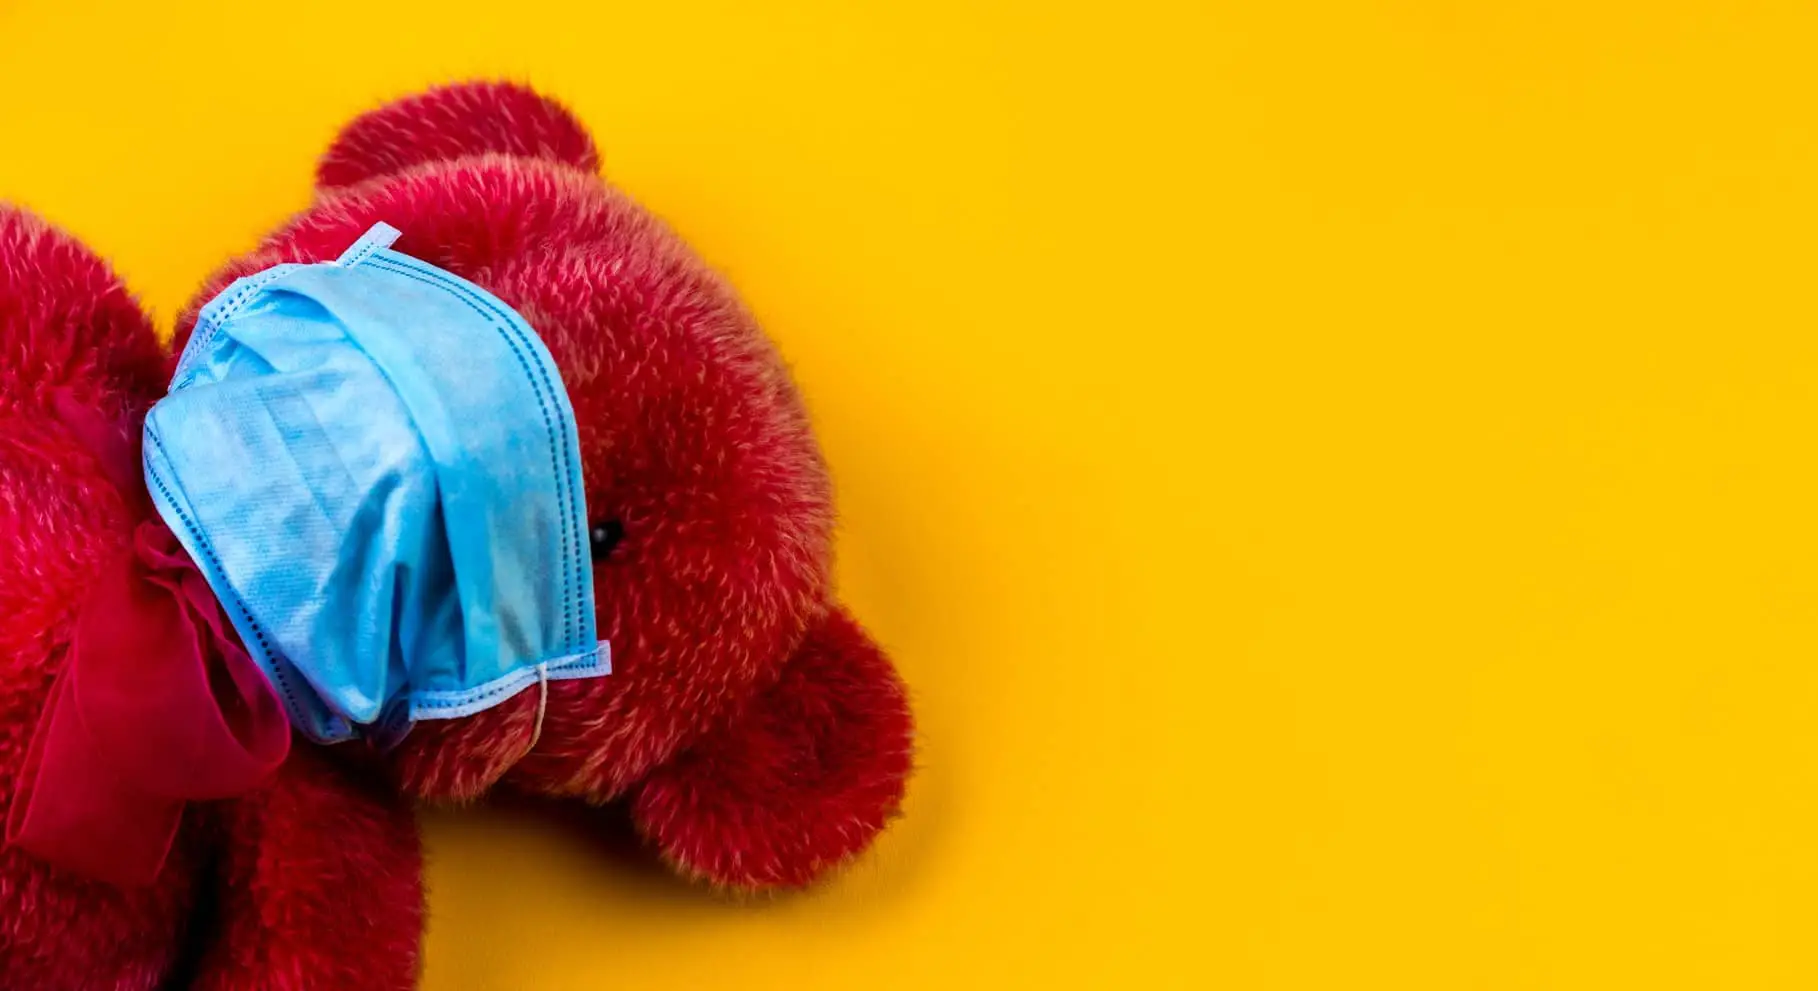 red teddy bear with face mask on